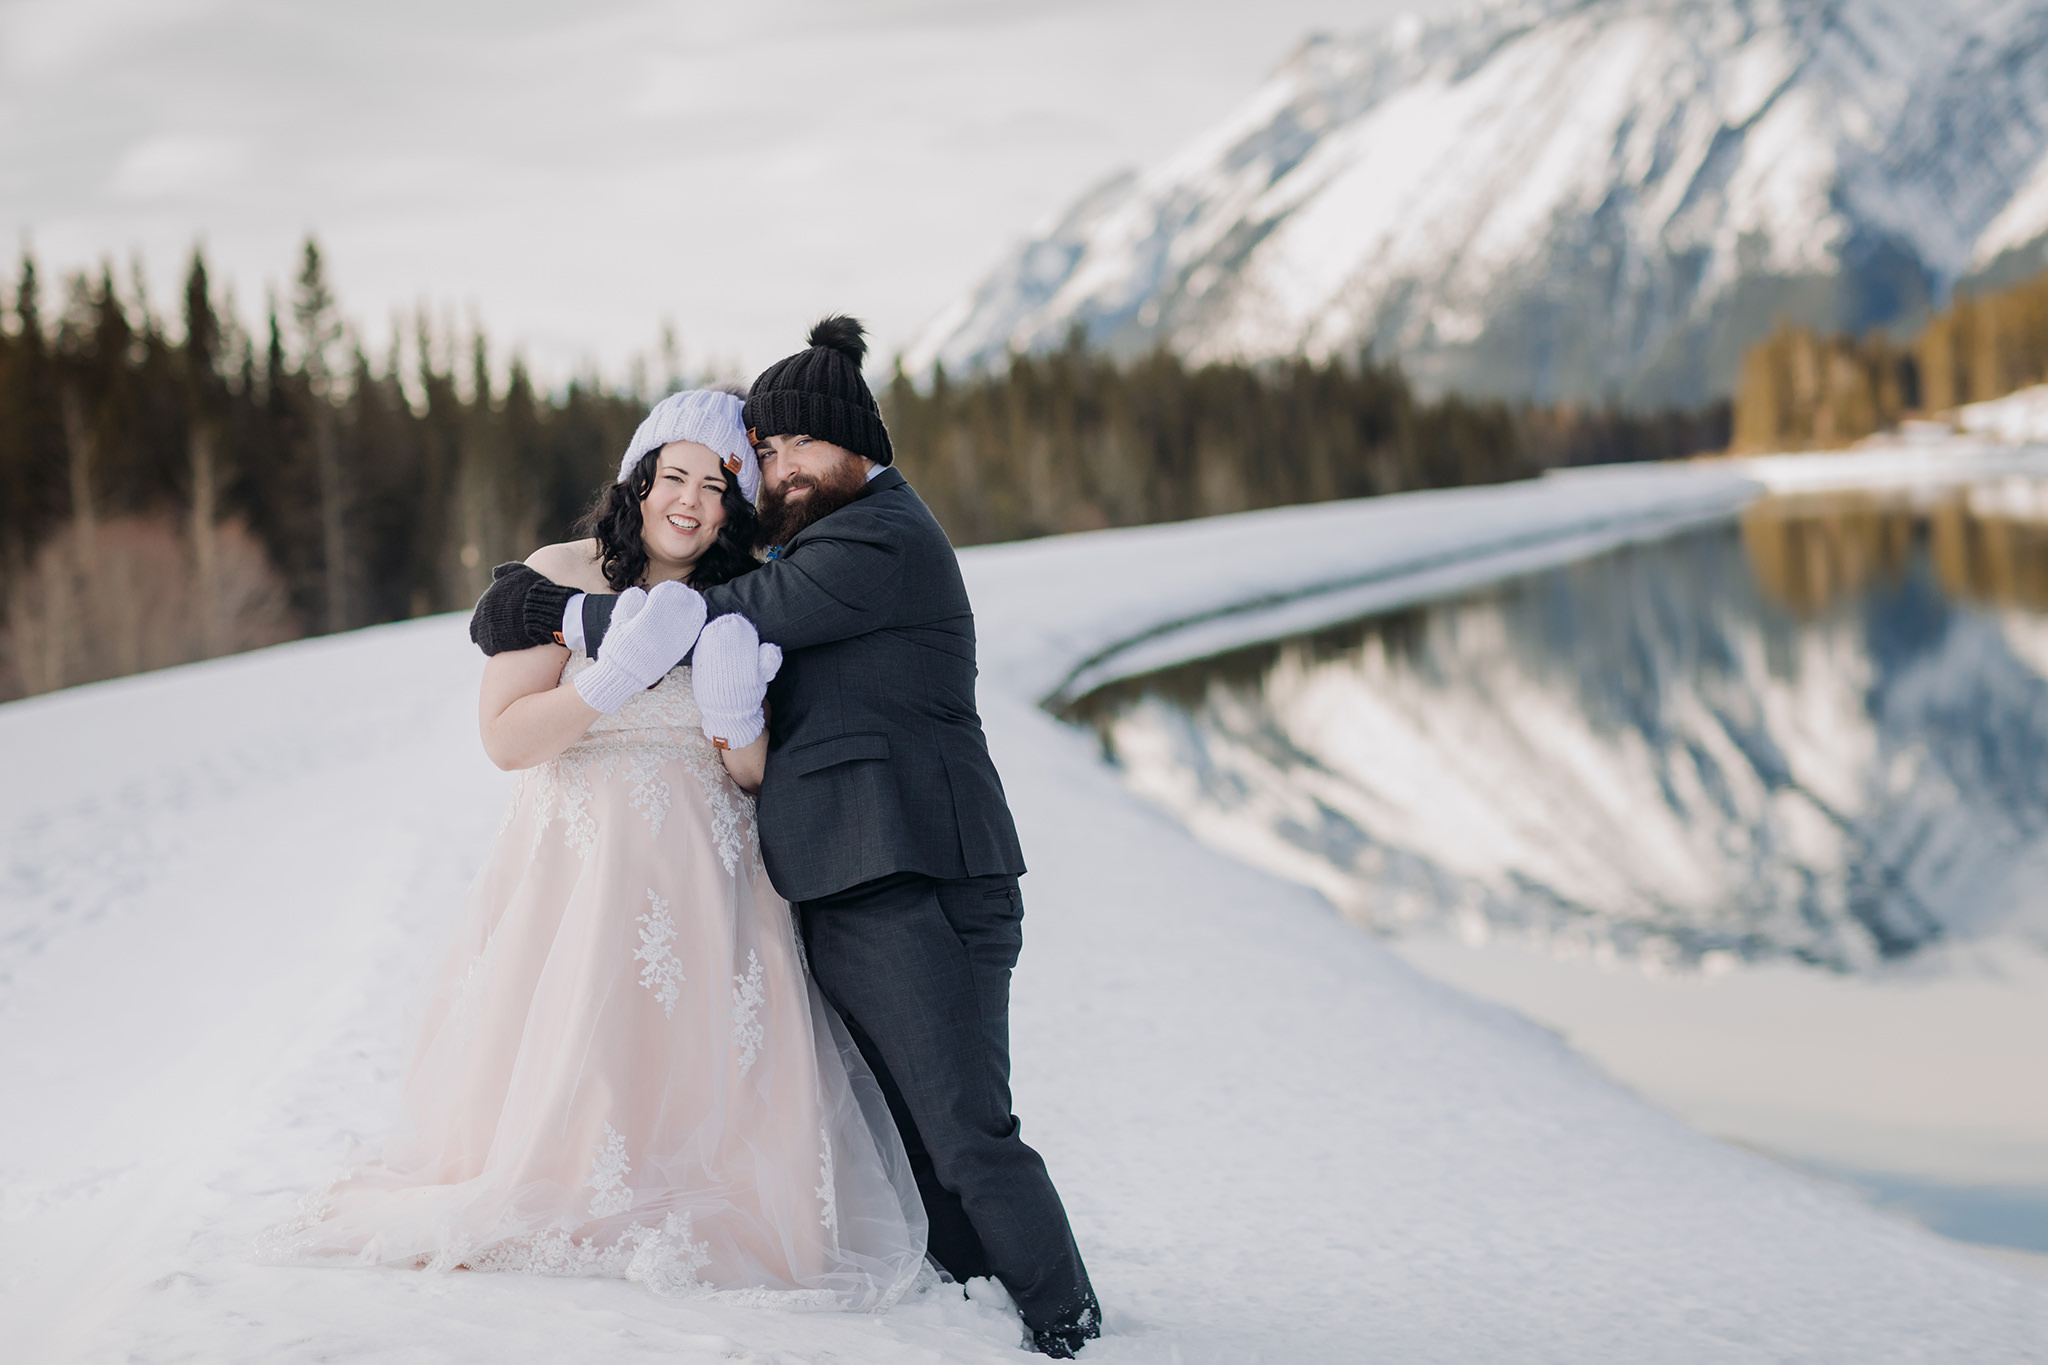 Falcon Crest Lodge wedding Canmore winter wedding photos bride & groom at Goat Pond in Kananaskis photographed by ENV Photography woolen hats mittens